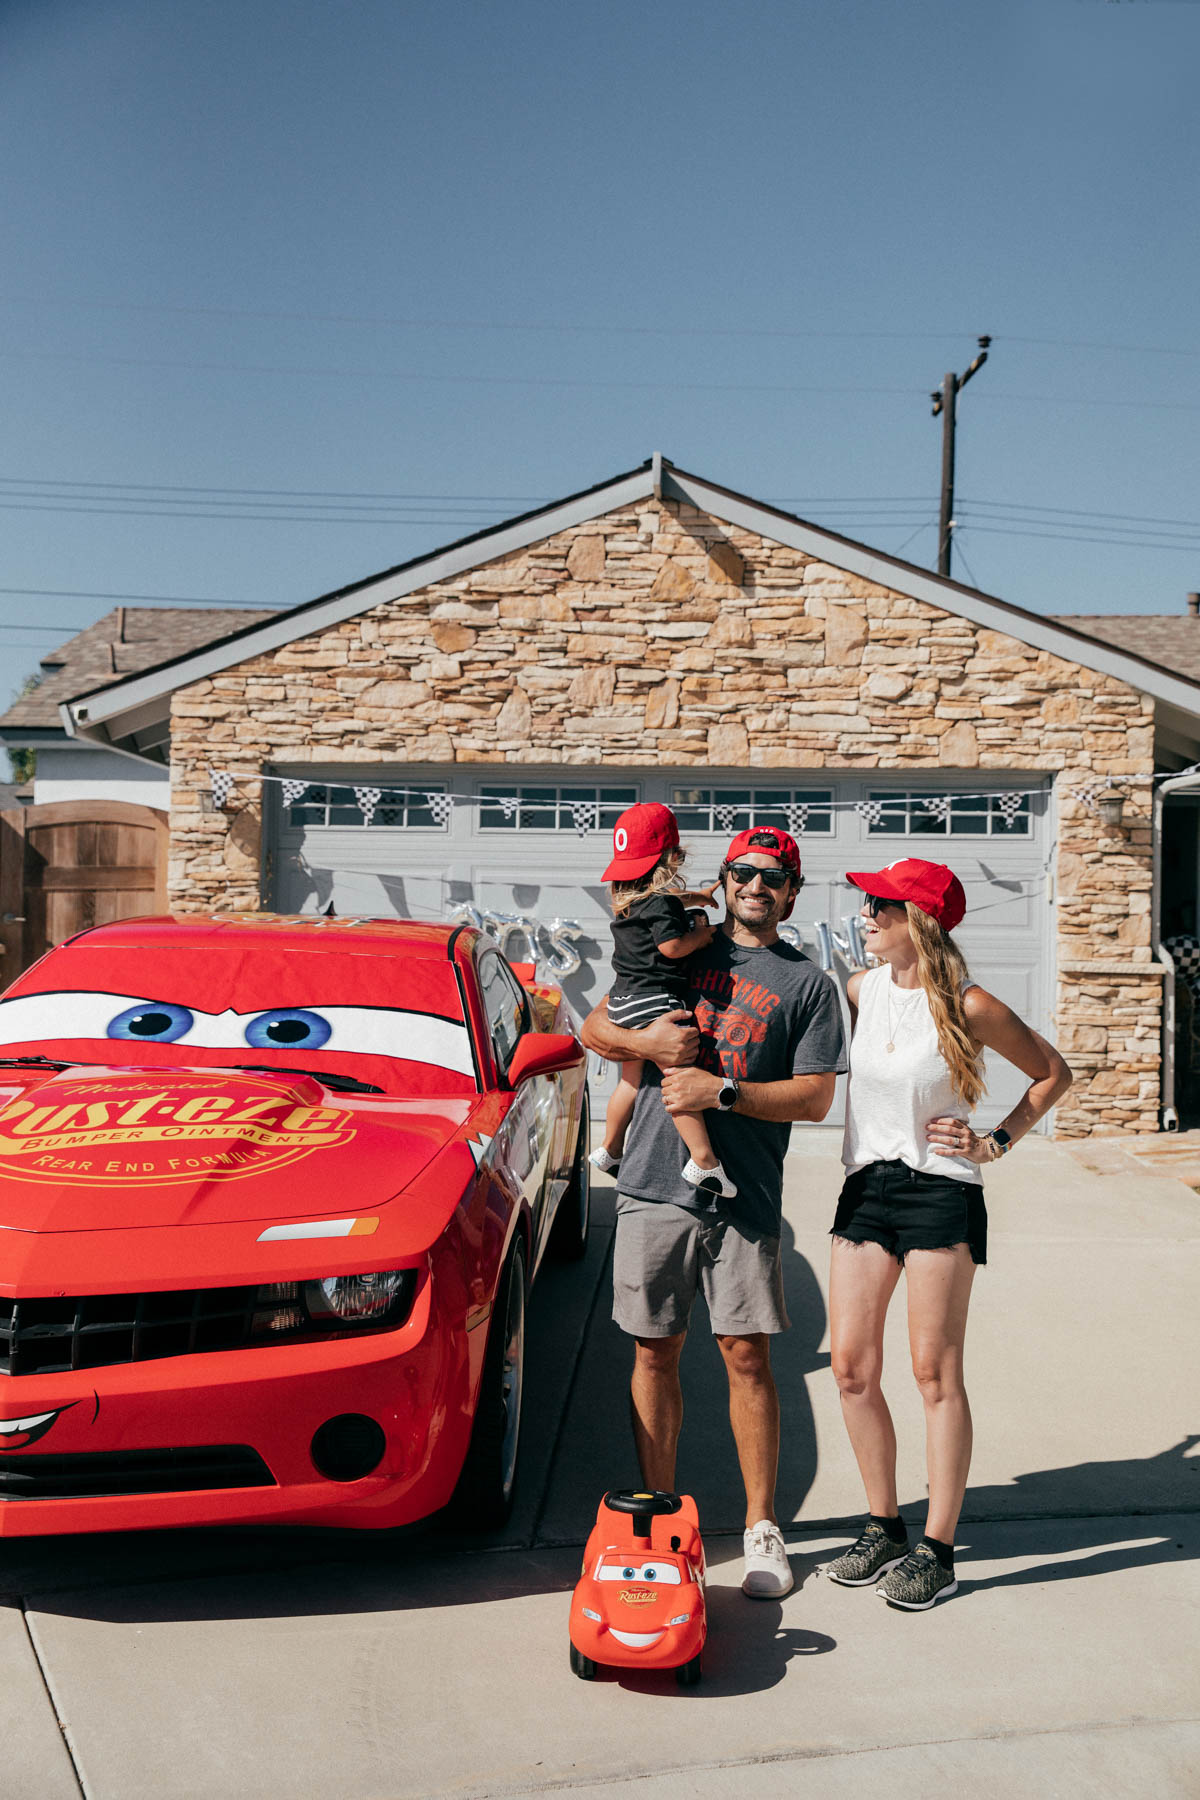 Family photos with Lightning McQueen Impersonator Car at Disney Pixar Cars themed birthday